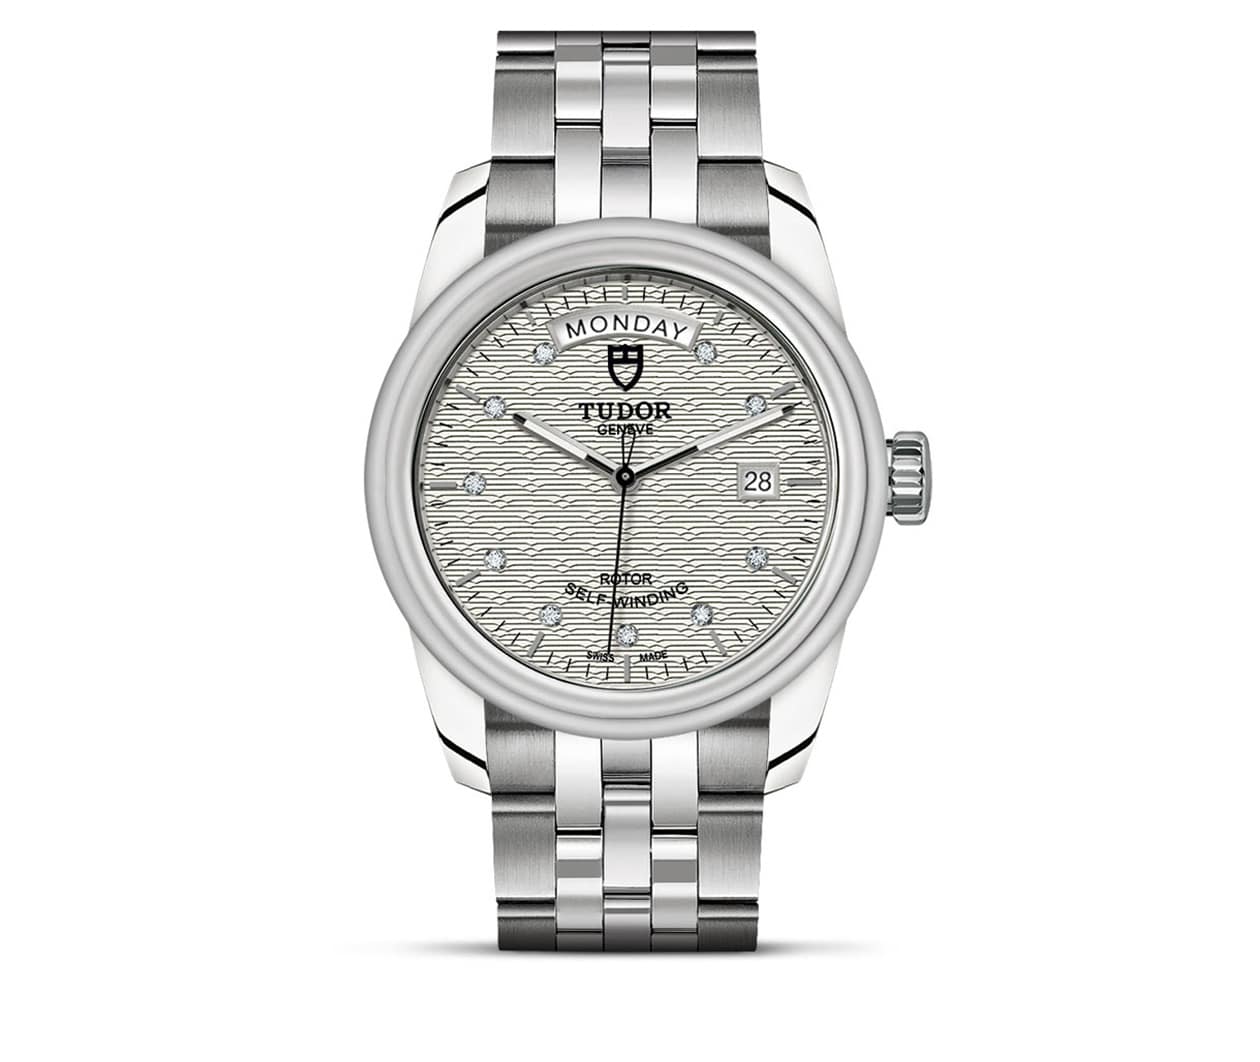 TUDOR Glamour Date Day M56000 0004 FINAL